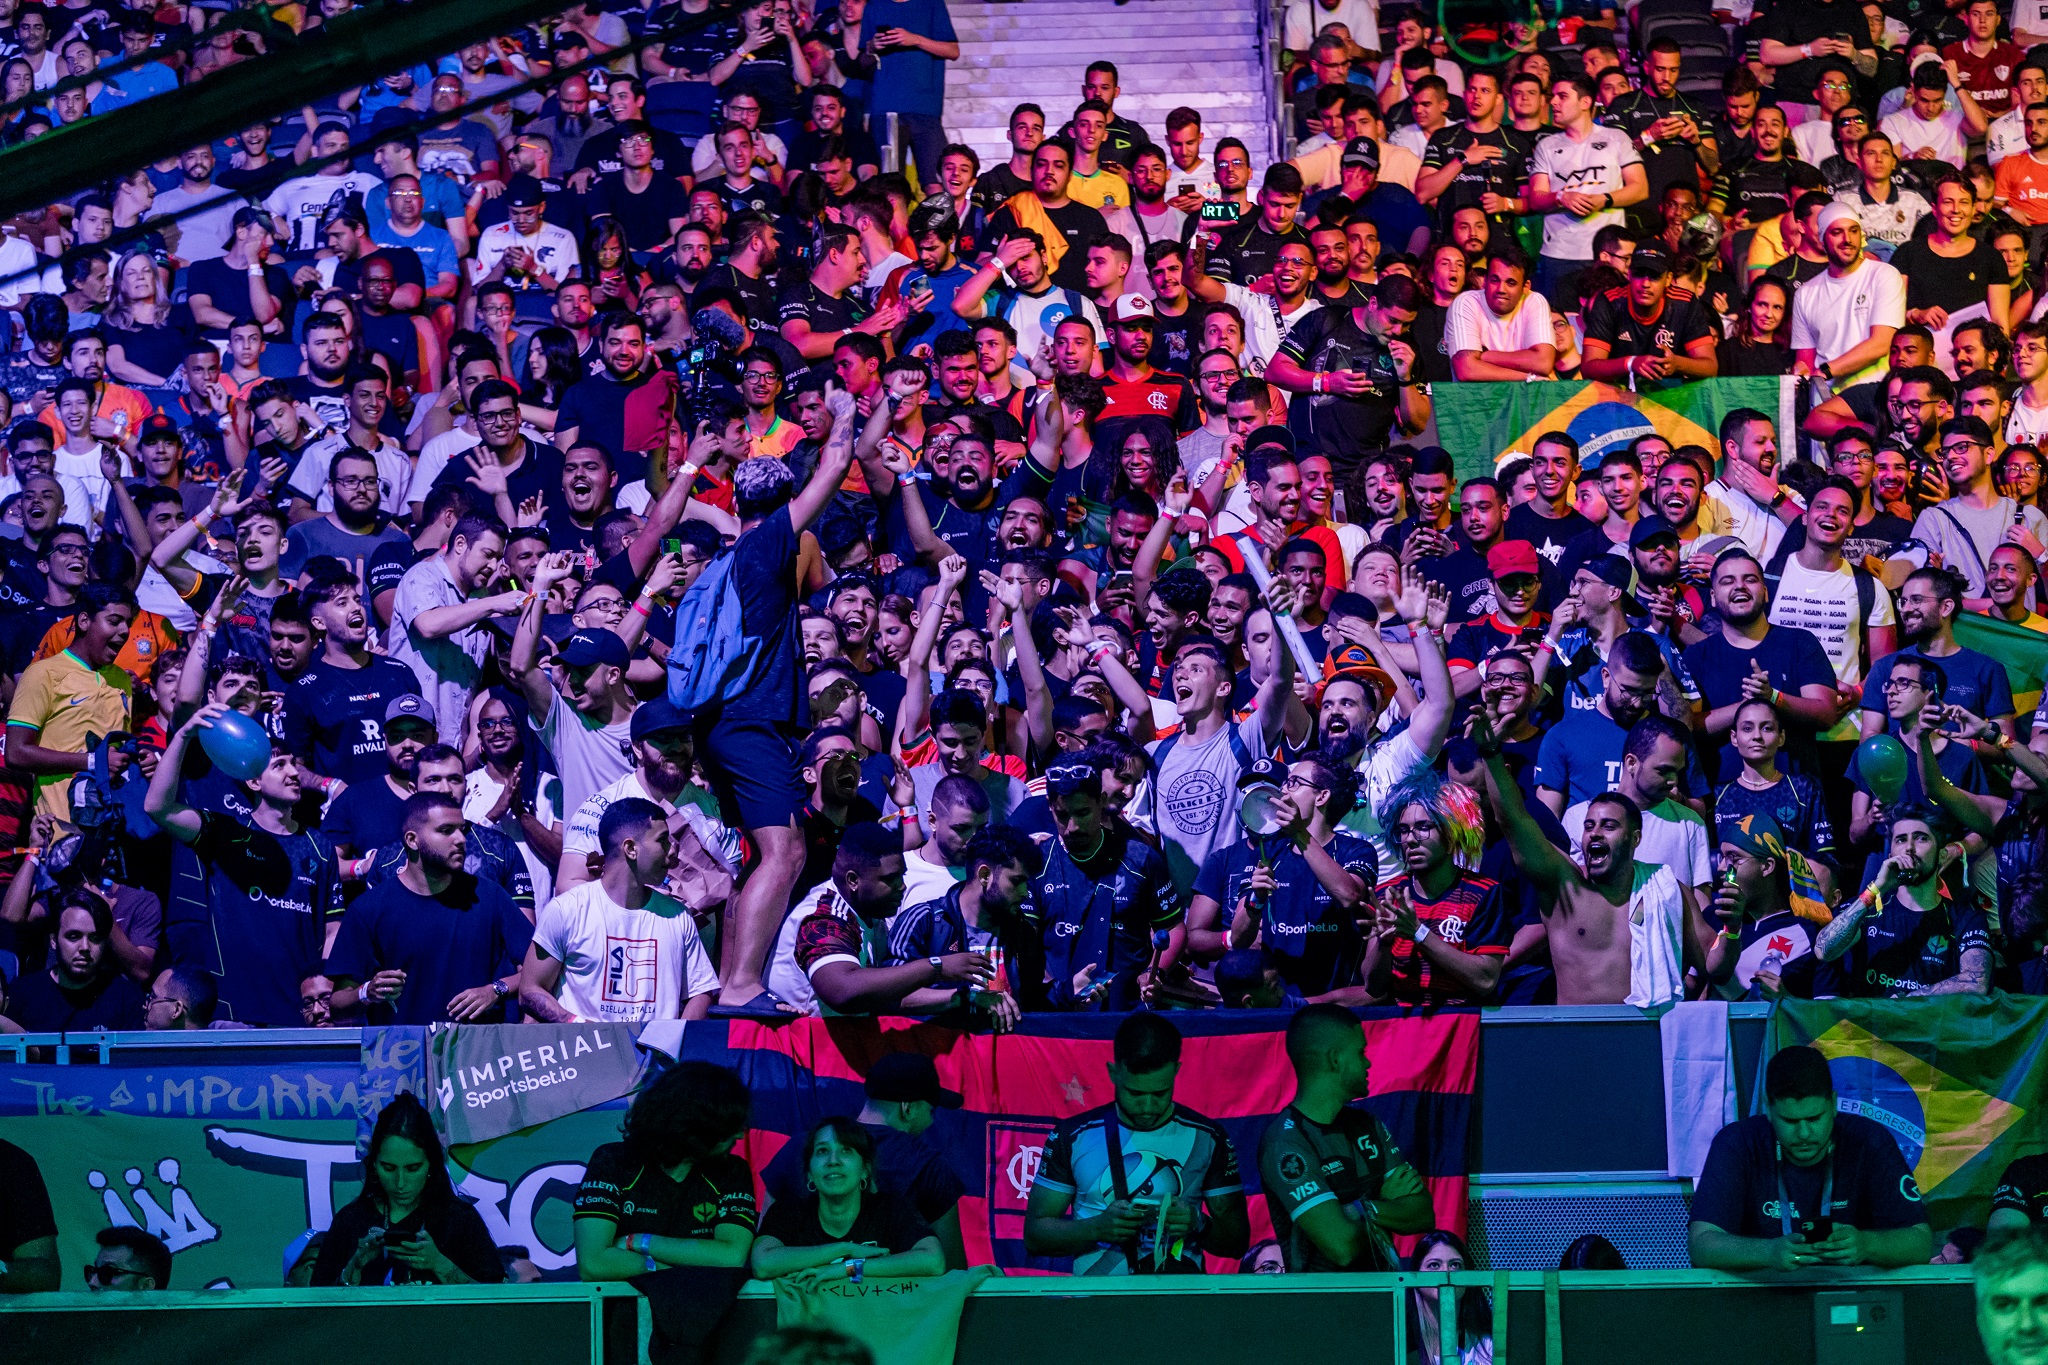 Highlights That Made The Brazilian Crowd Erupt #2 (IEM Rio Legends Stage) 